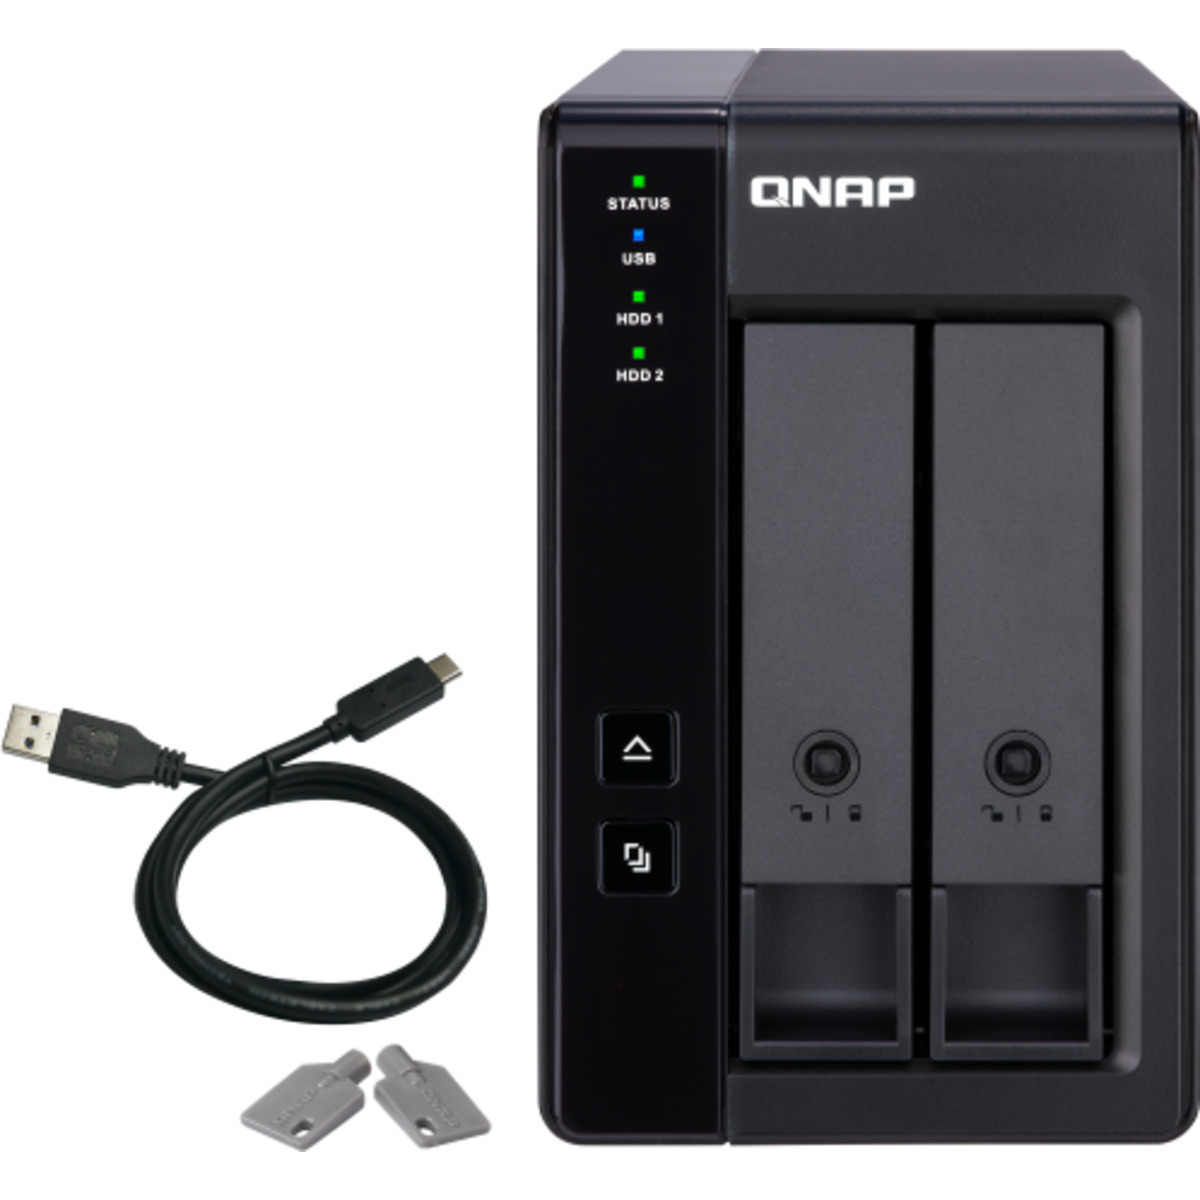 QNAP TR-002 External Expansion Drive 8tb 2-Bay Desktop Multimedia / Power User / Business Expansion Enclosure 2x4tb Western Digital Red Plus WD40EFPX 3.5 5400rpm SATA 6Gb/s HDD NAS Class Drives Installed - Burn-In Tested TR-002 External Expansion Drive